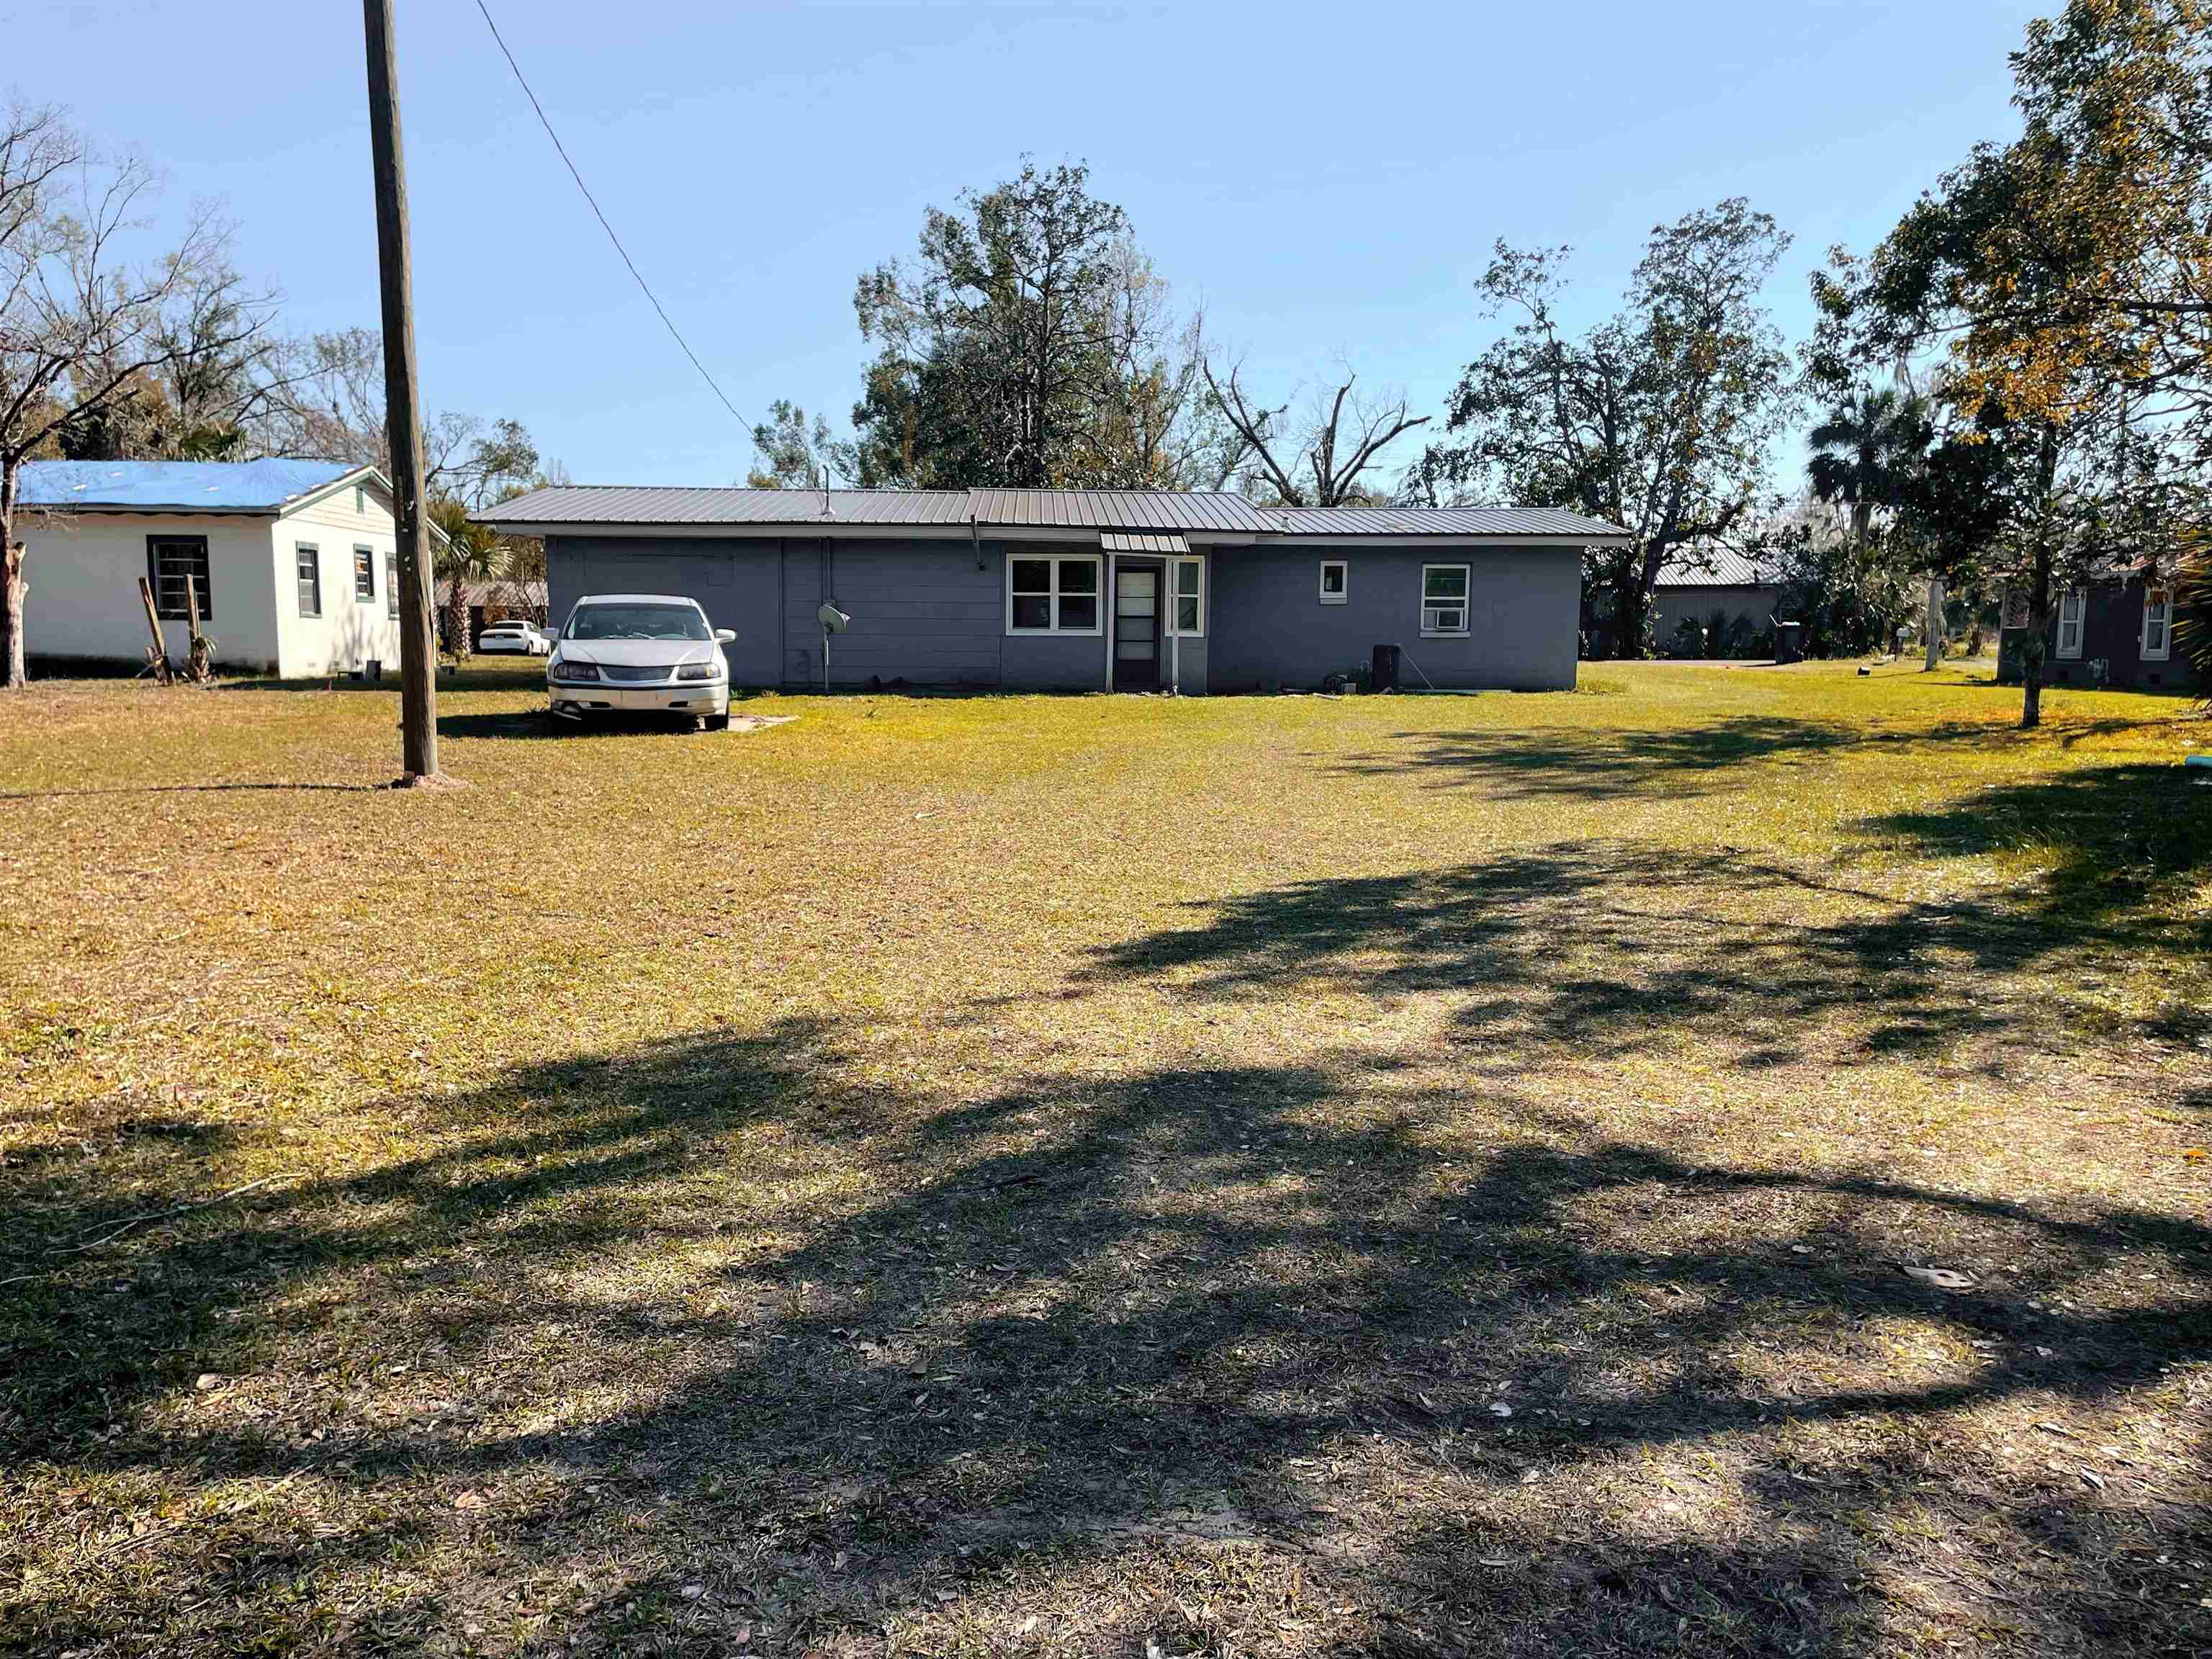 1004 W Bacon Street,PERRY,Florida 32347,4 Bedrooms Bedrooms,1 BathroomBathrooms,Detached single family,1004 W Bacon Street,368847